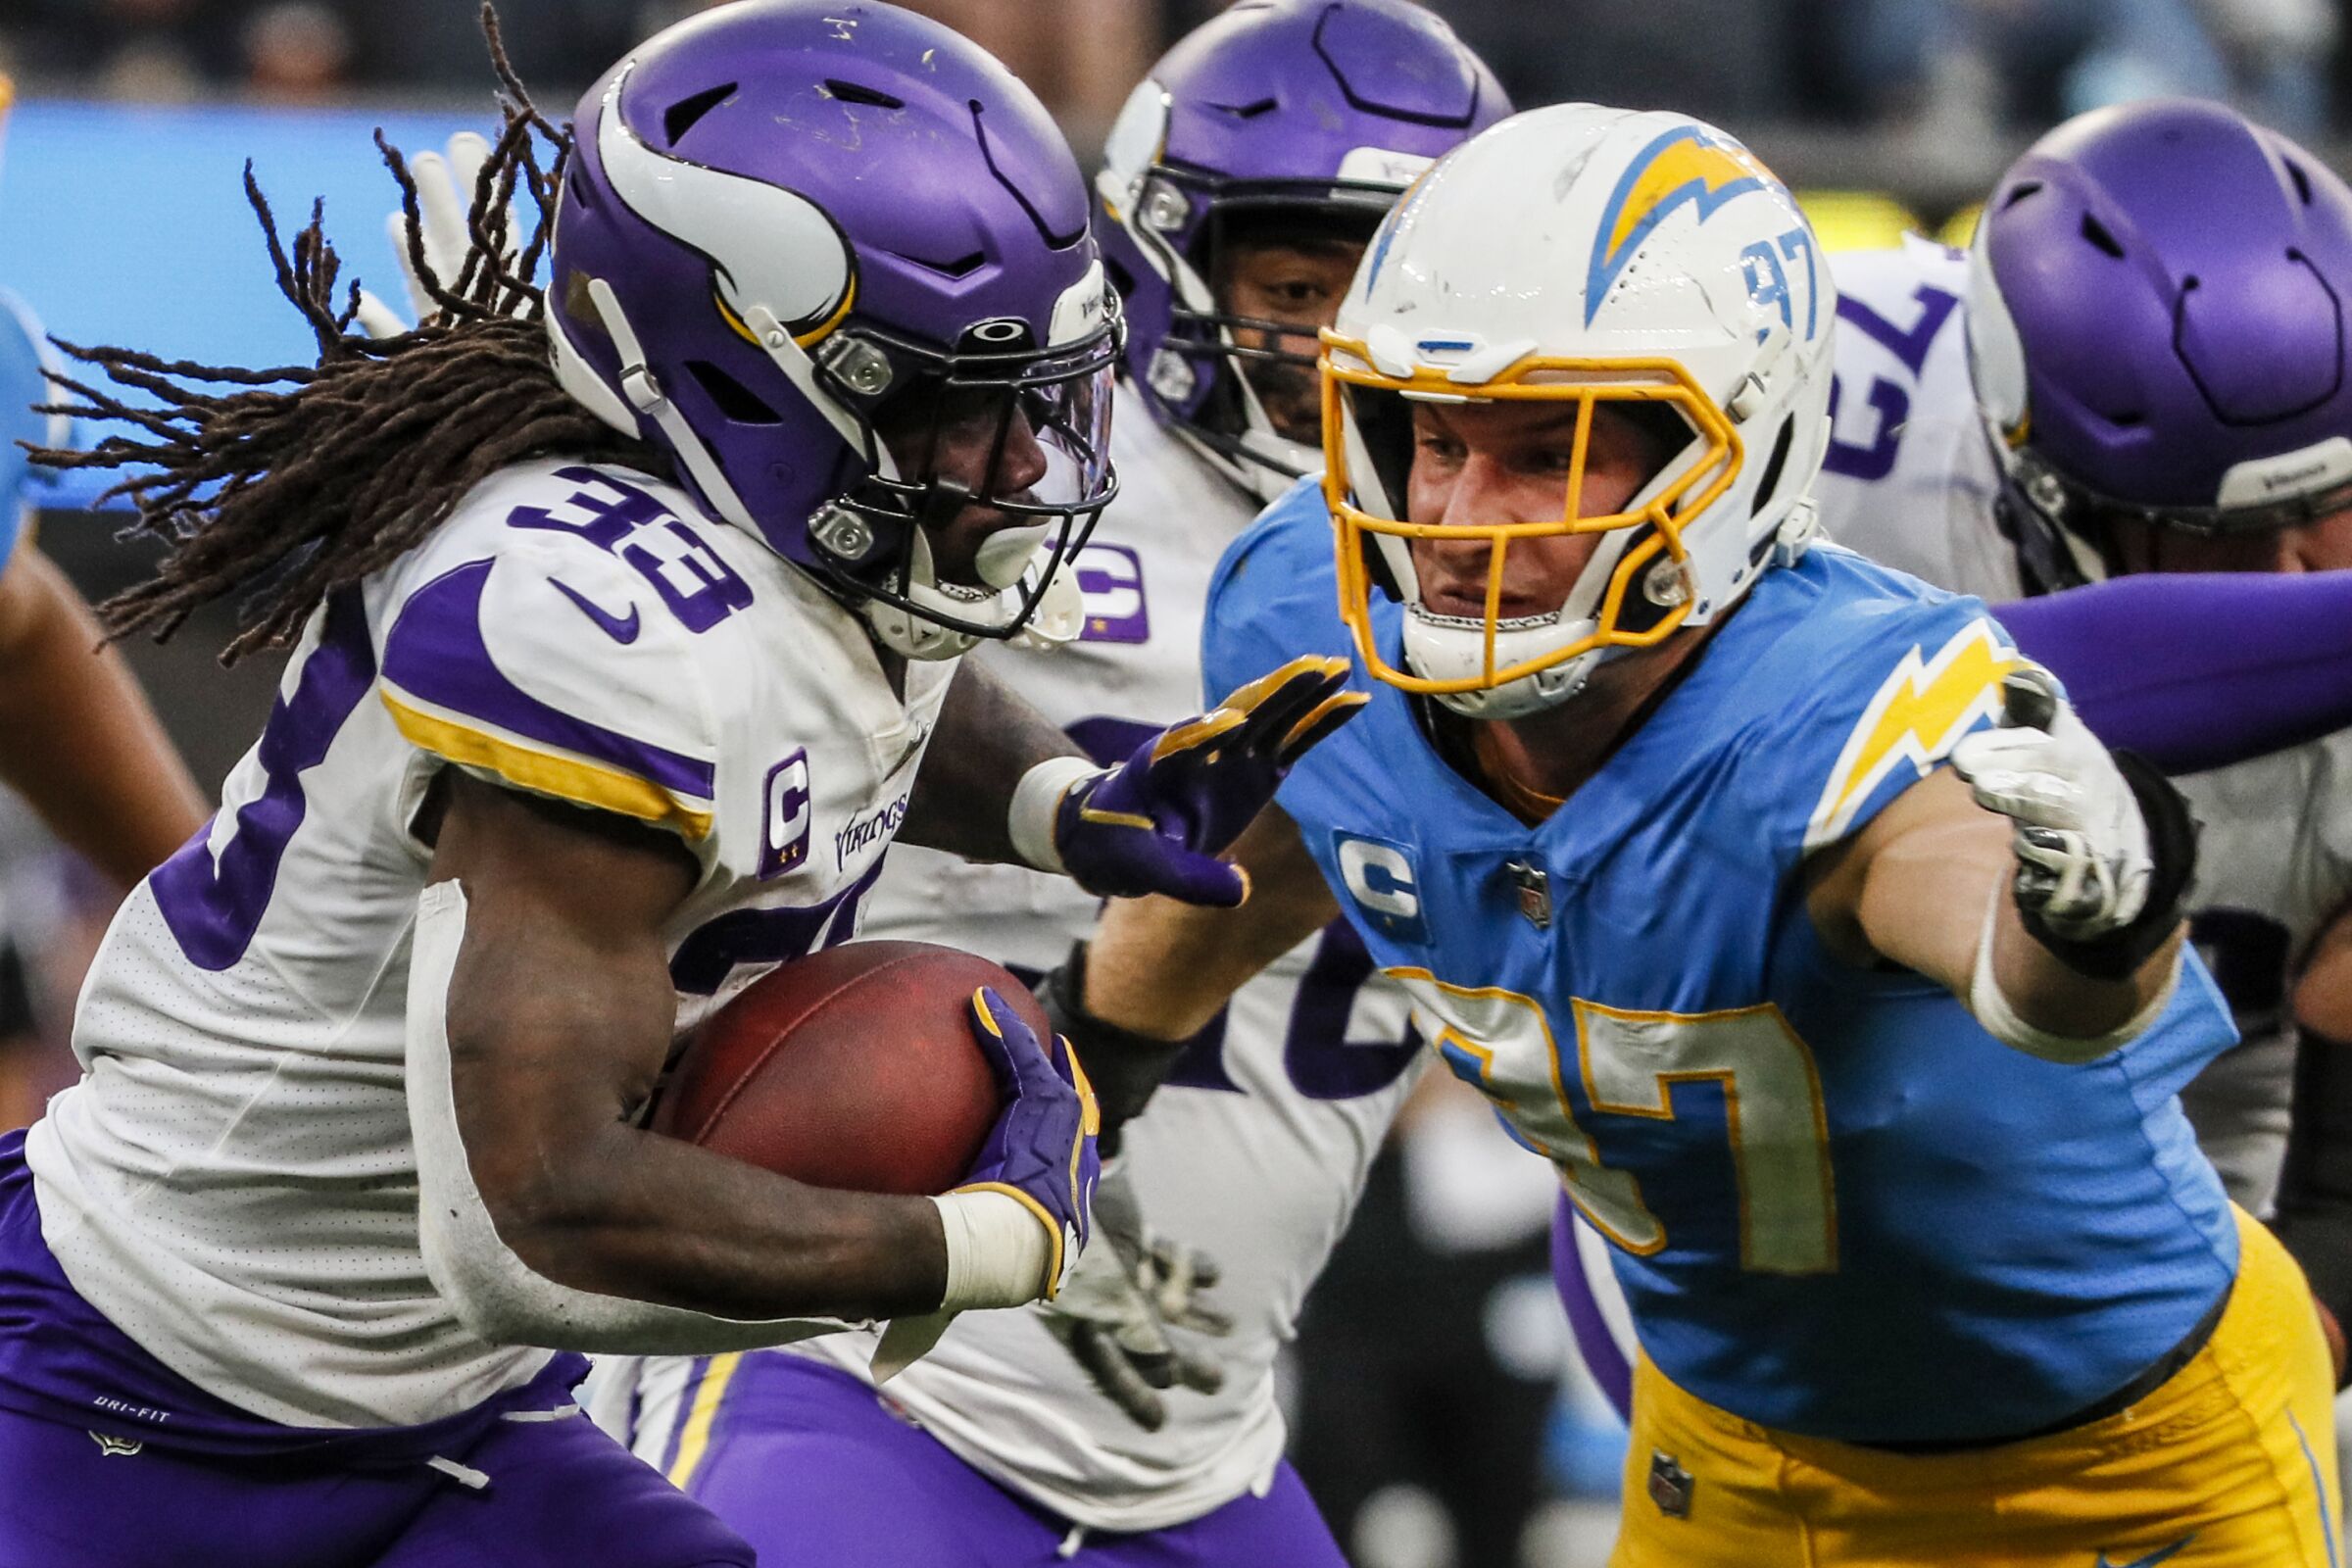 Minnesota Vikings running back Dalvin Cook, left, carries the ball in front of Chargers defensive end Joey Bosa.